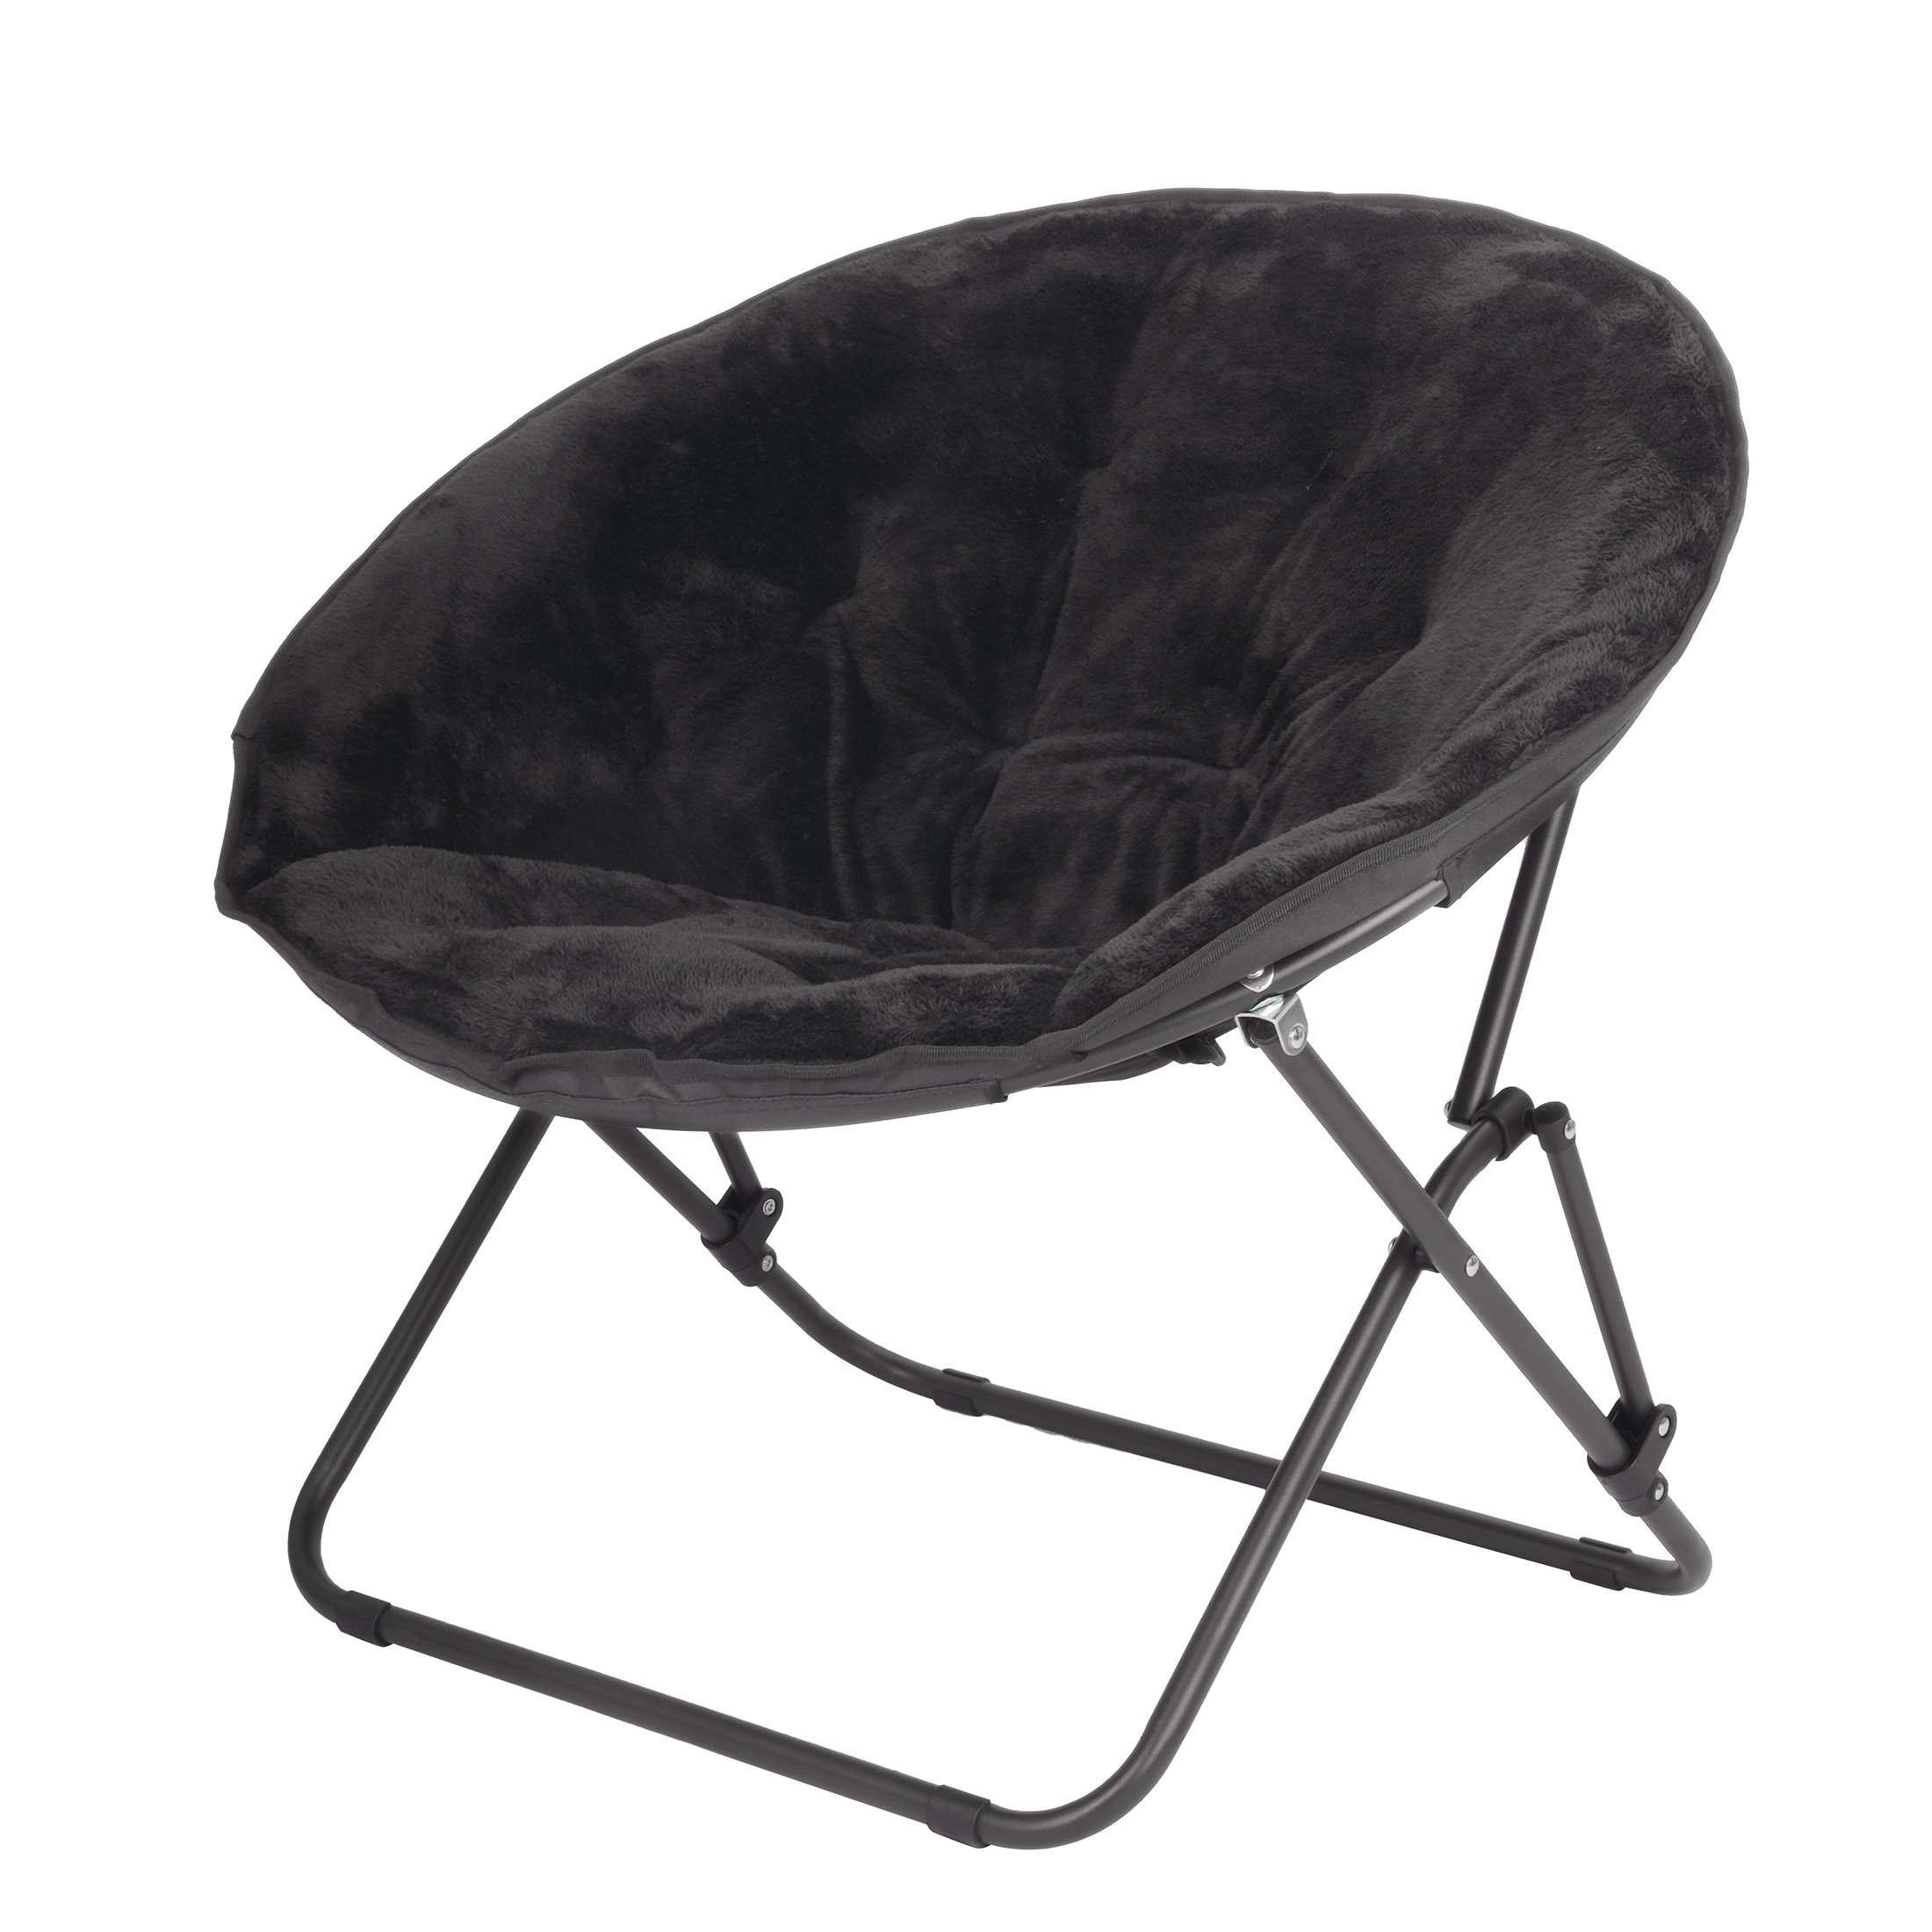 Mainstays Saucer Chair for Kids and Teens, Black - image 3 of 6